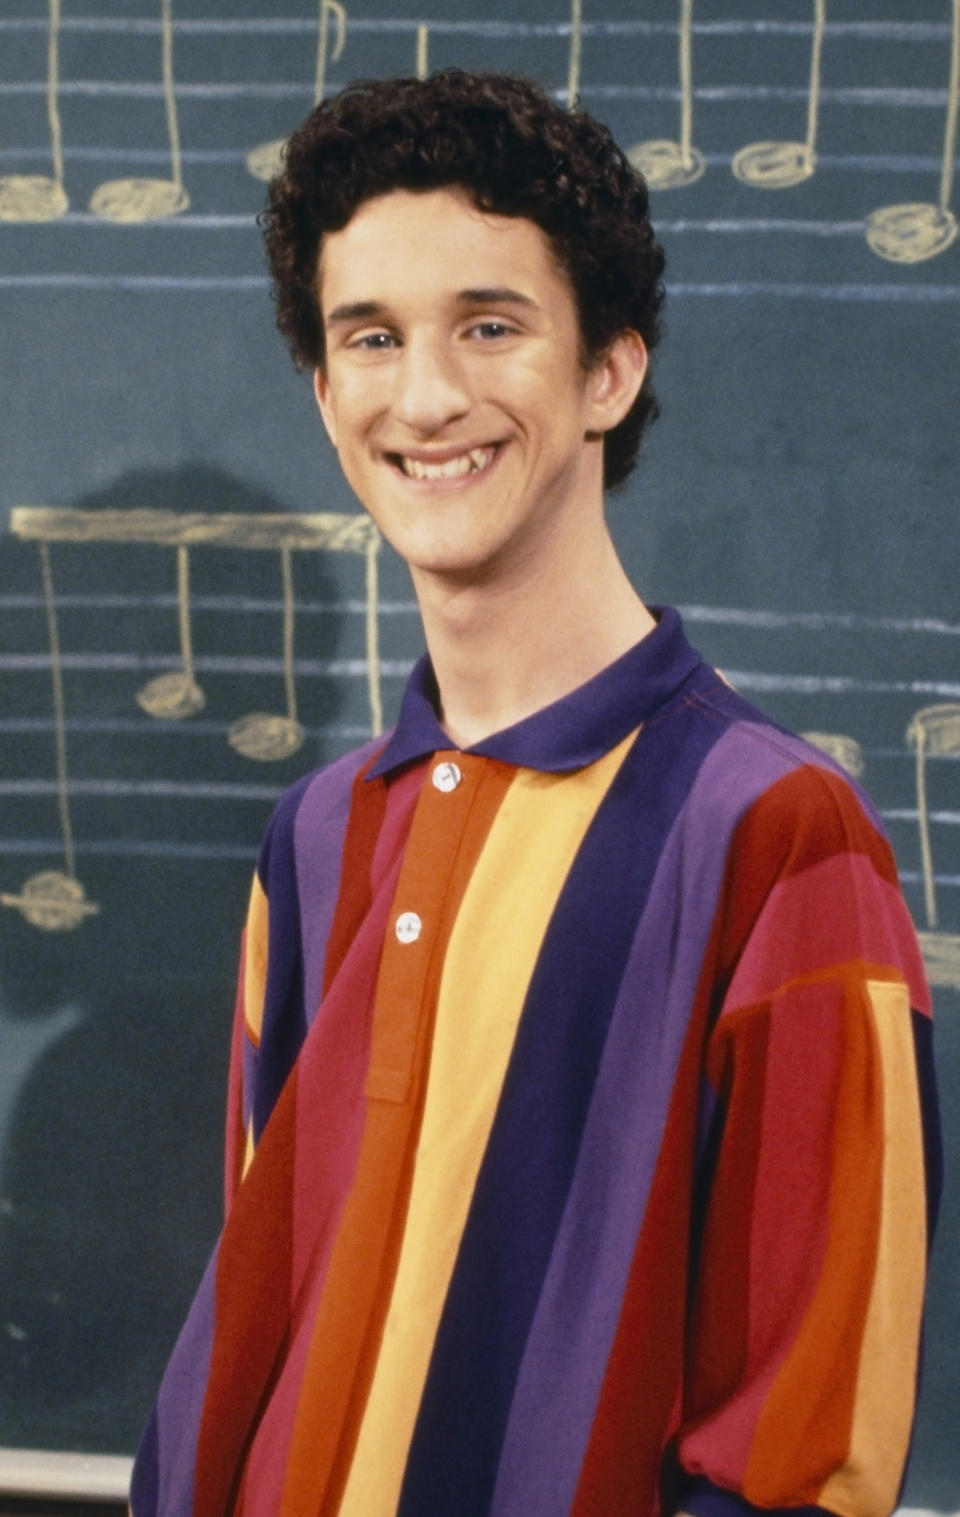 This image released by NBC shows actor Dustin Diamond as Samuel Powers, better known as Screech" from the 1990's series "Saved by the Bell." Diamond died Monday after a three-week fight with carcinoma, according to his representative. He was 44. Diamond was hospitalized last month in Florida and his team disclosed later he had cancer. (Paul Drinkwater/NBCU Photo Bank via AP)